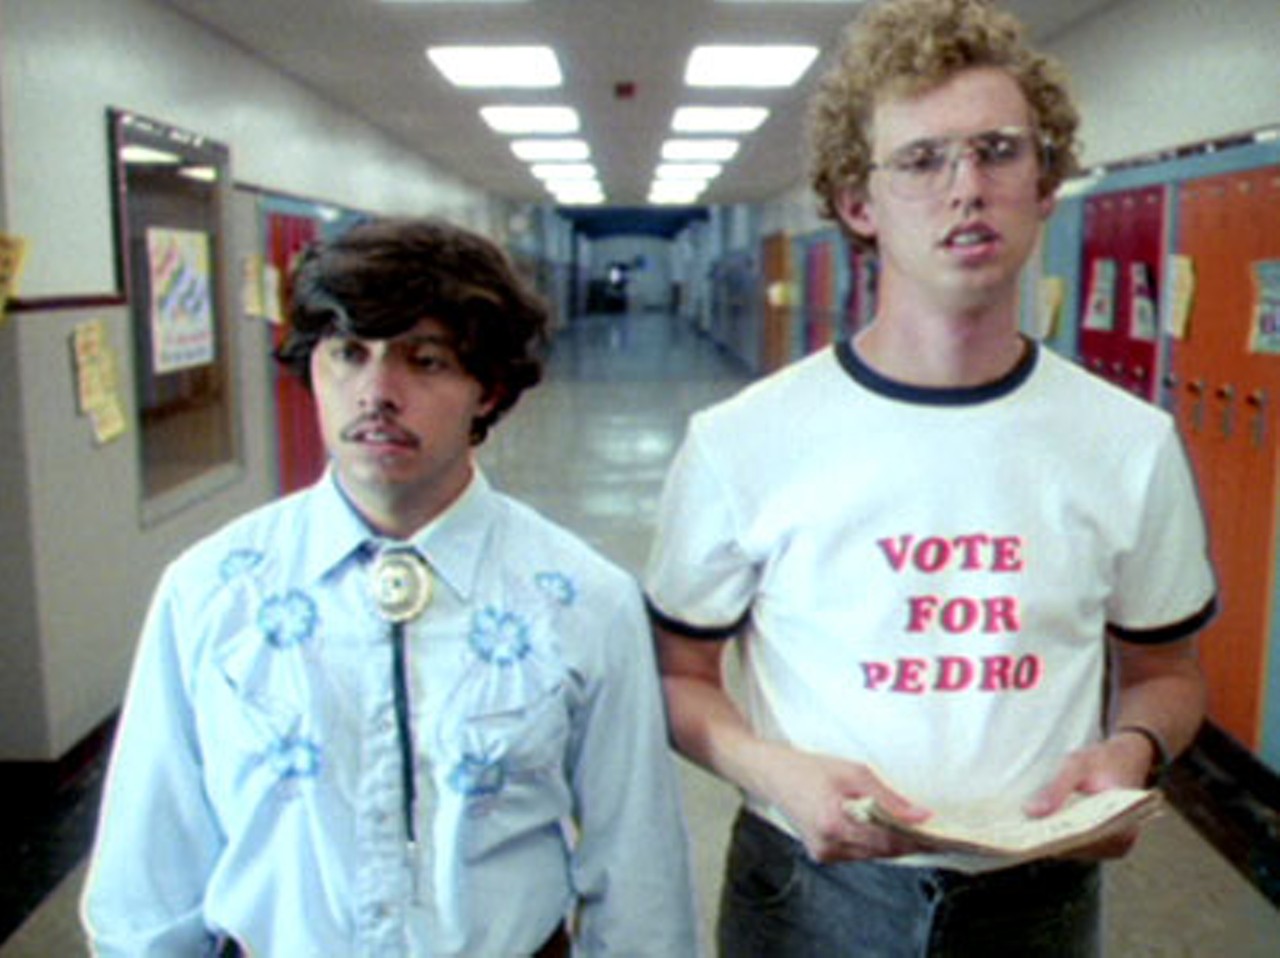 Vote for Pedro. The guy represented all those boys in high school who proudly wore mustaches.